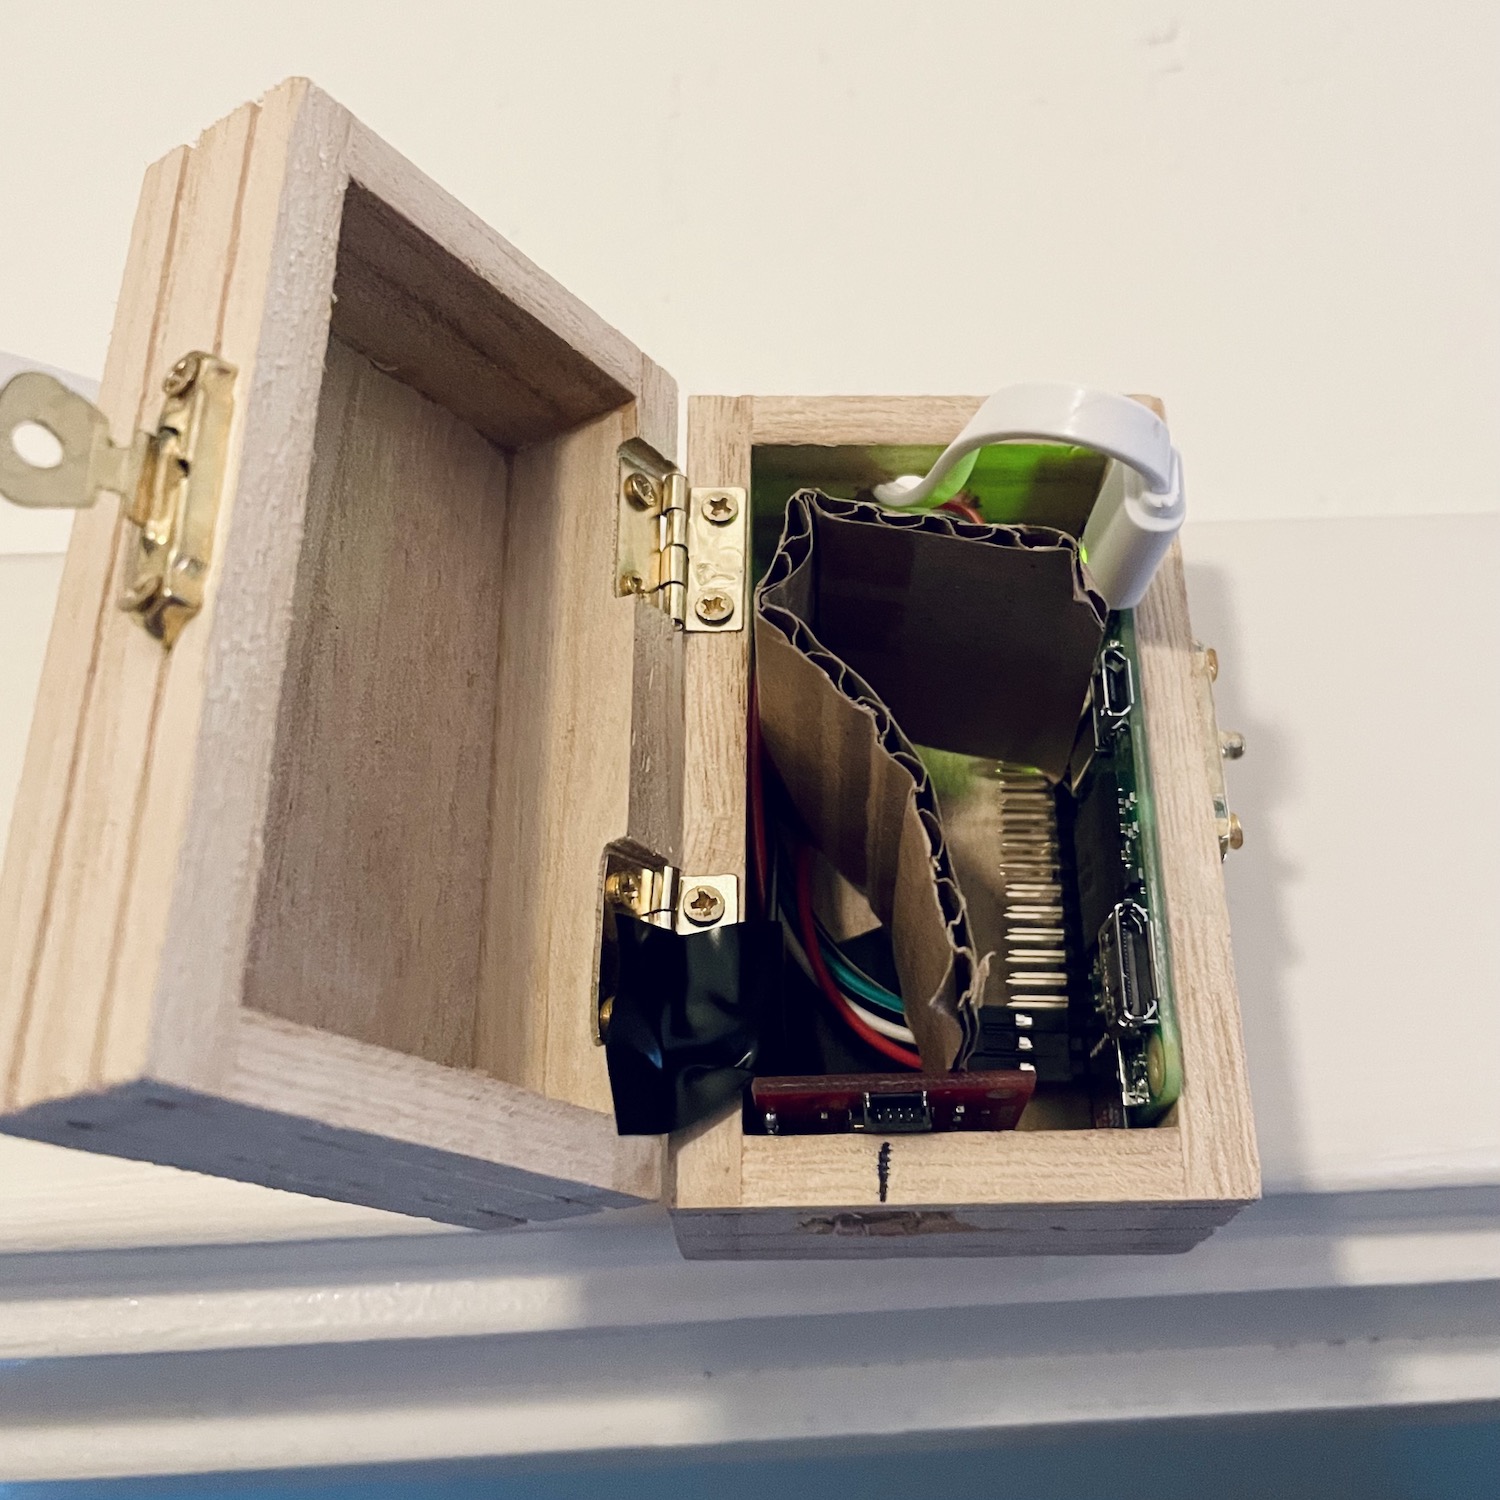 A Raspberry Pi Zero and AMG8833 thermopile sensor shoved in a small wooden box, and taped to the top of a door